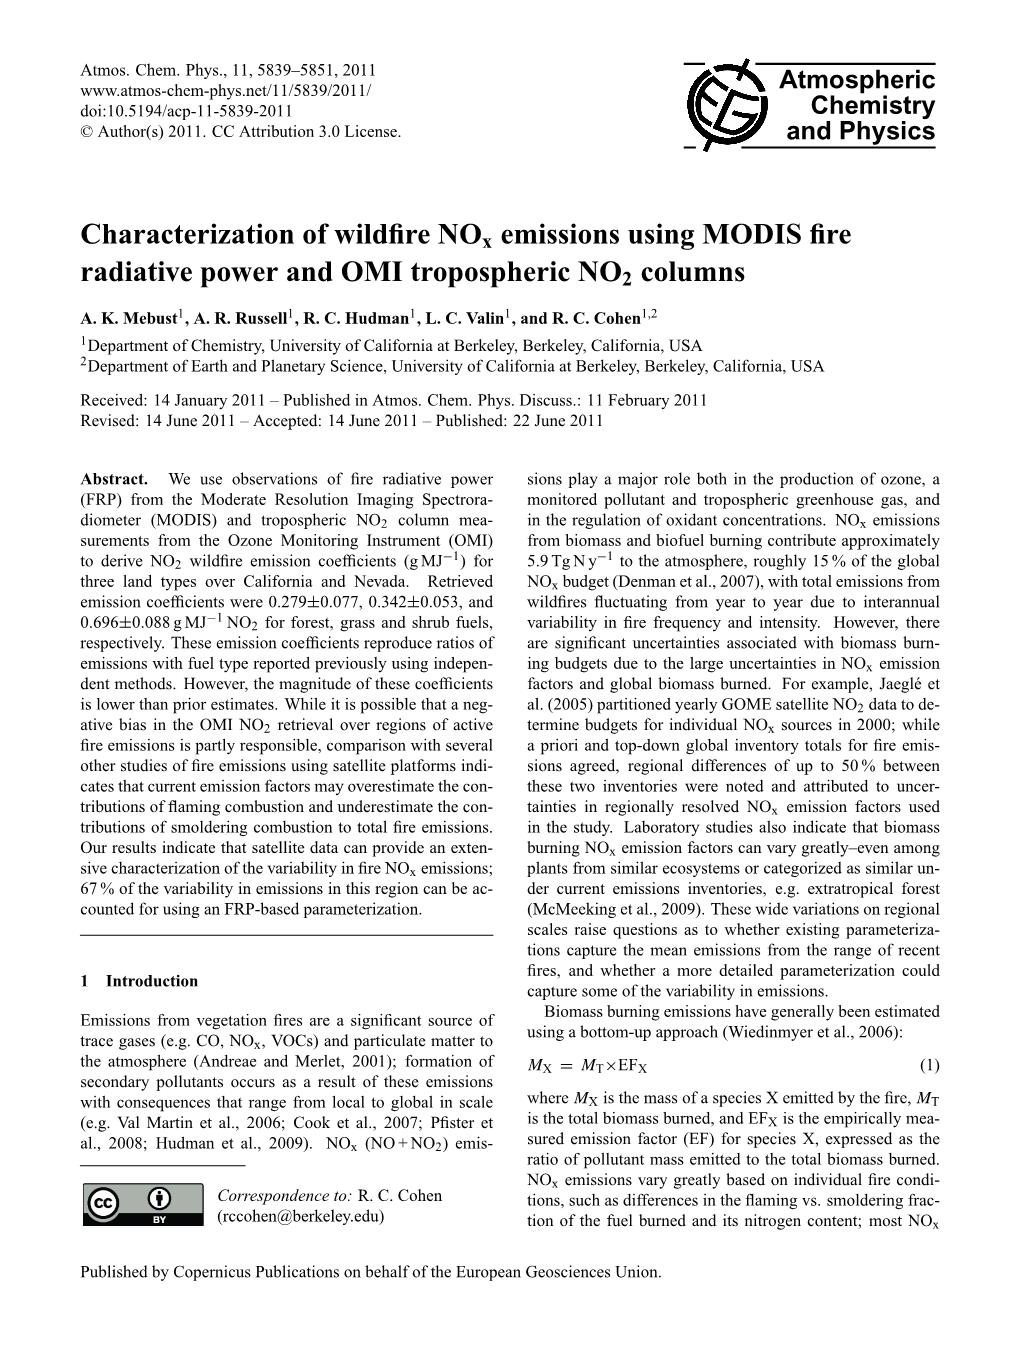 Characterization of Wildfire Nox Emissions Using MODIS Fire